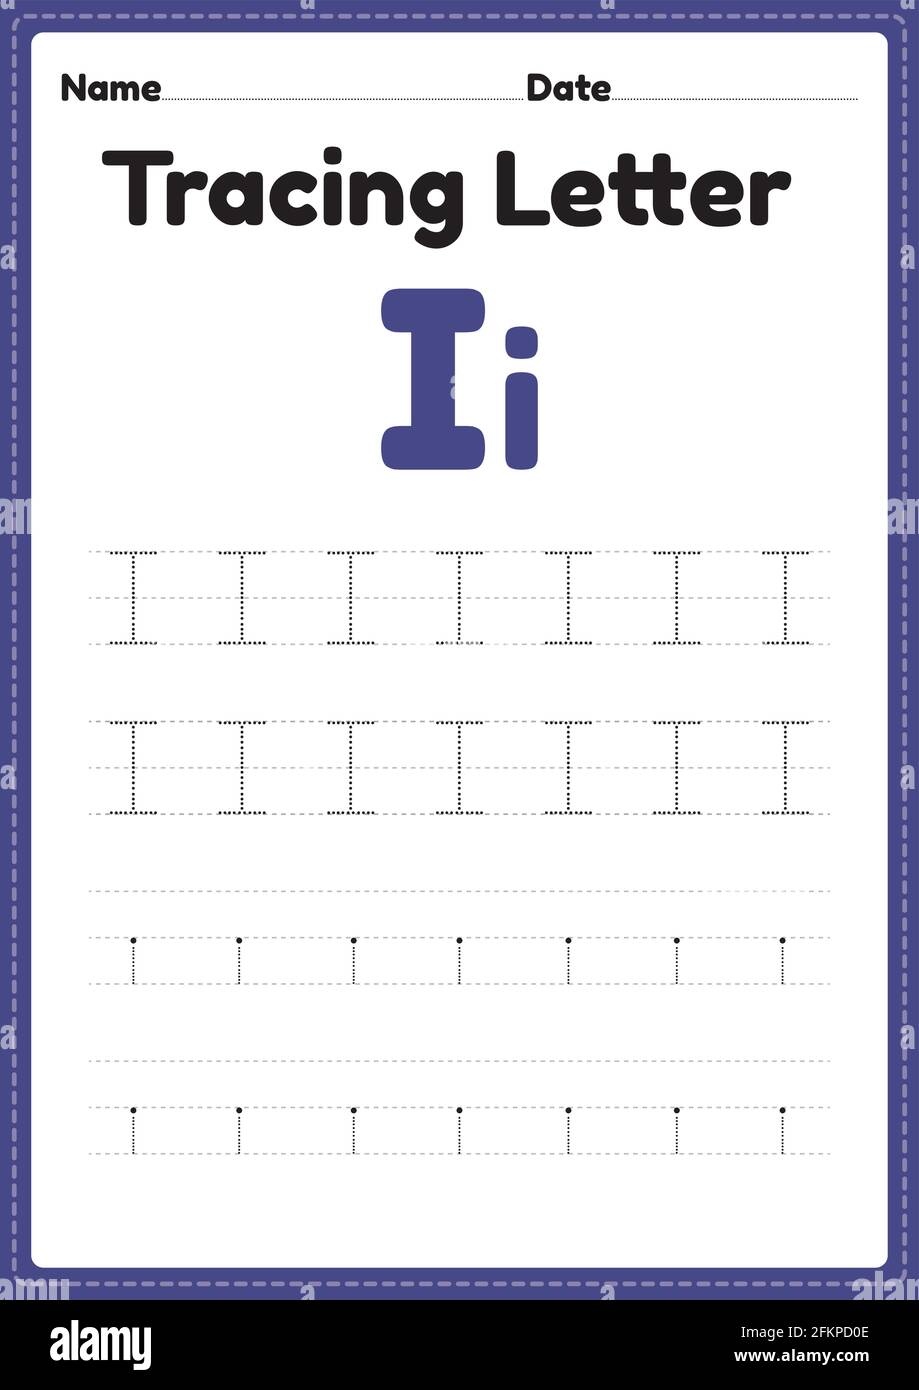 Tracing letter i alphabet worksheet for kindergarten and preschool In Tracing Letters Template